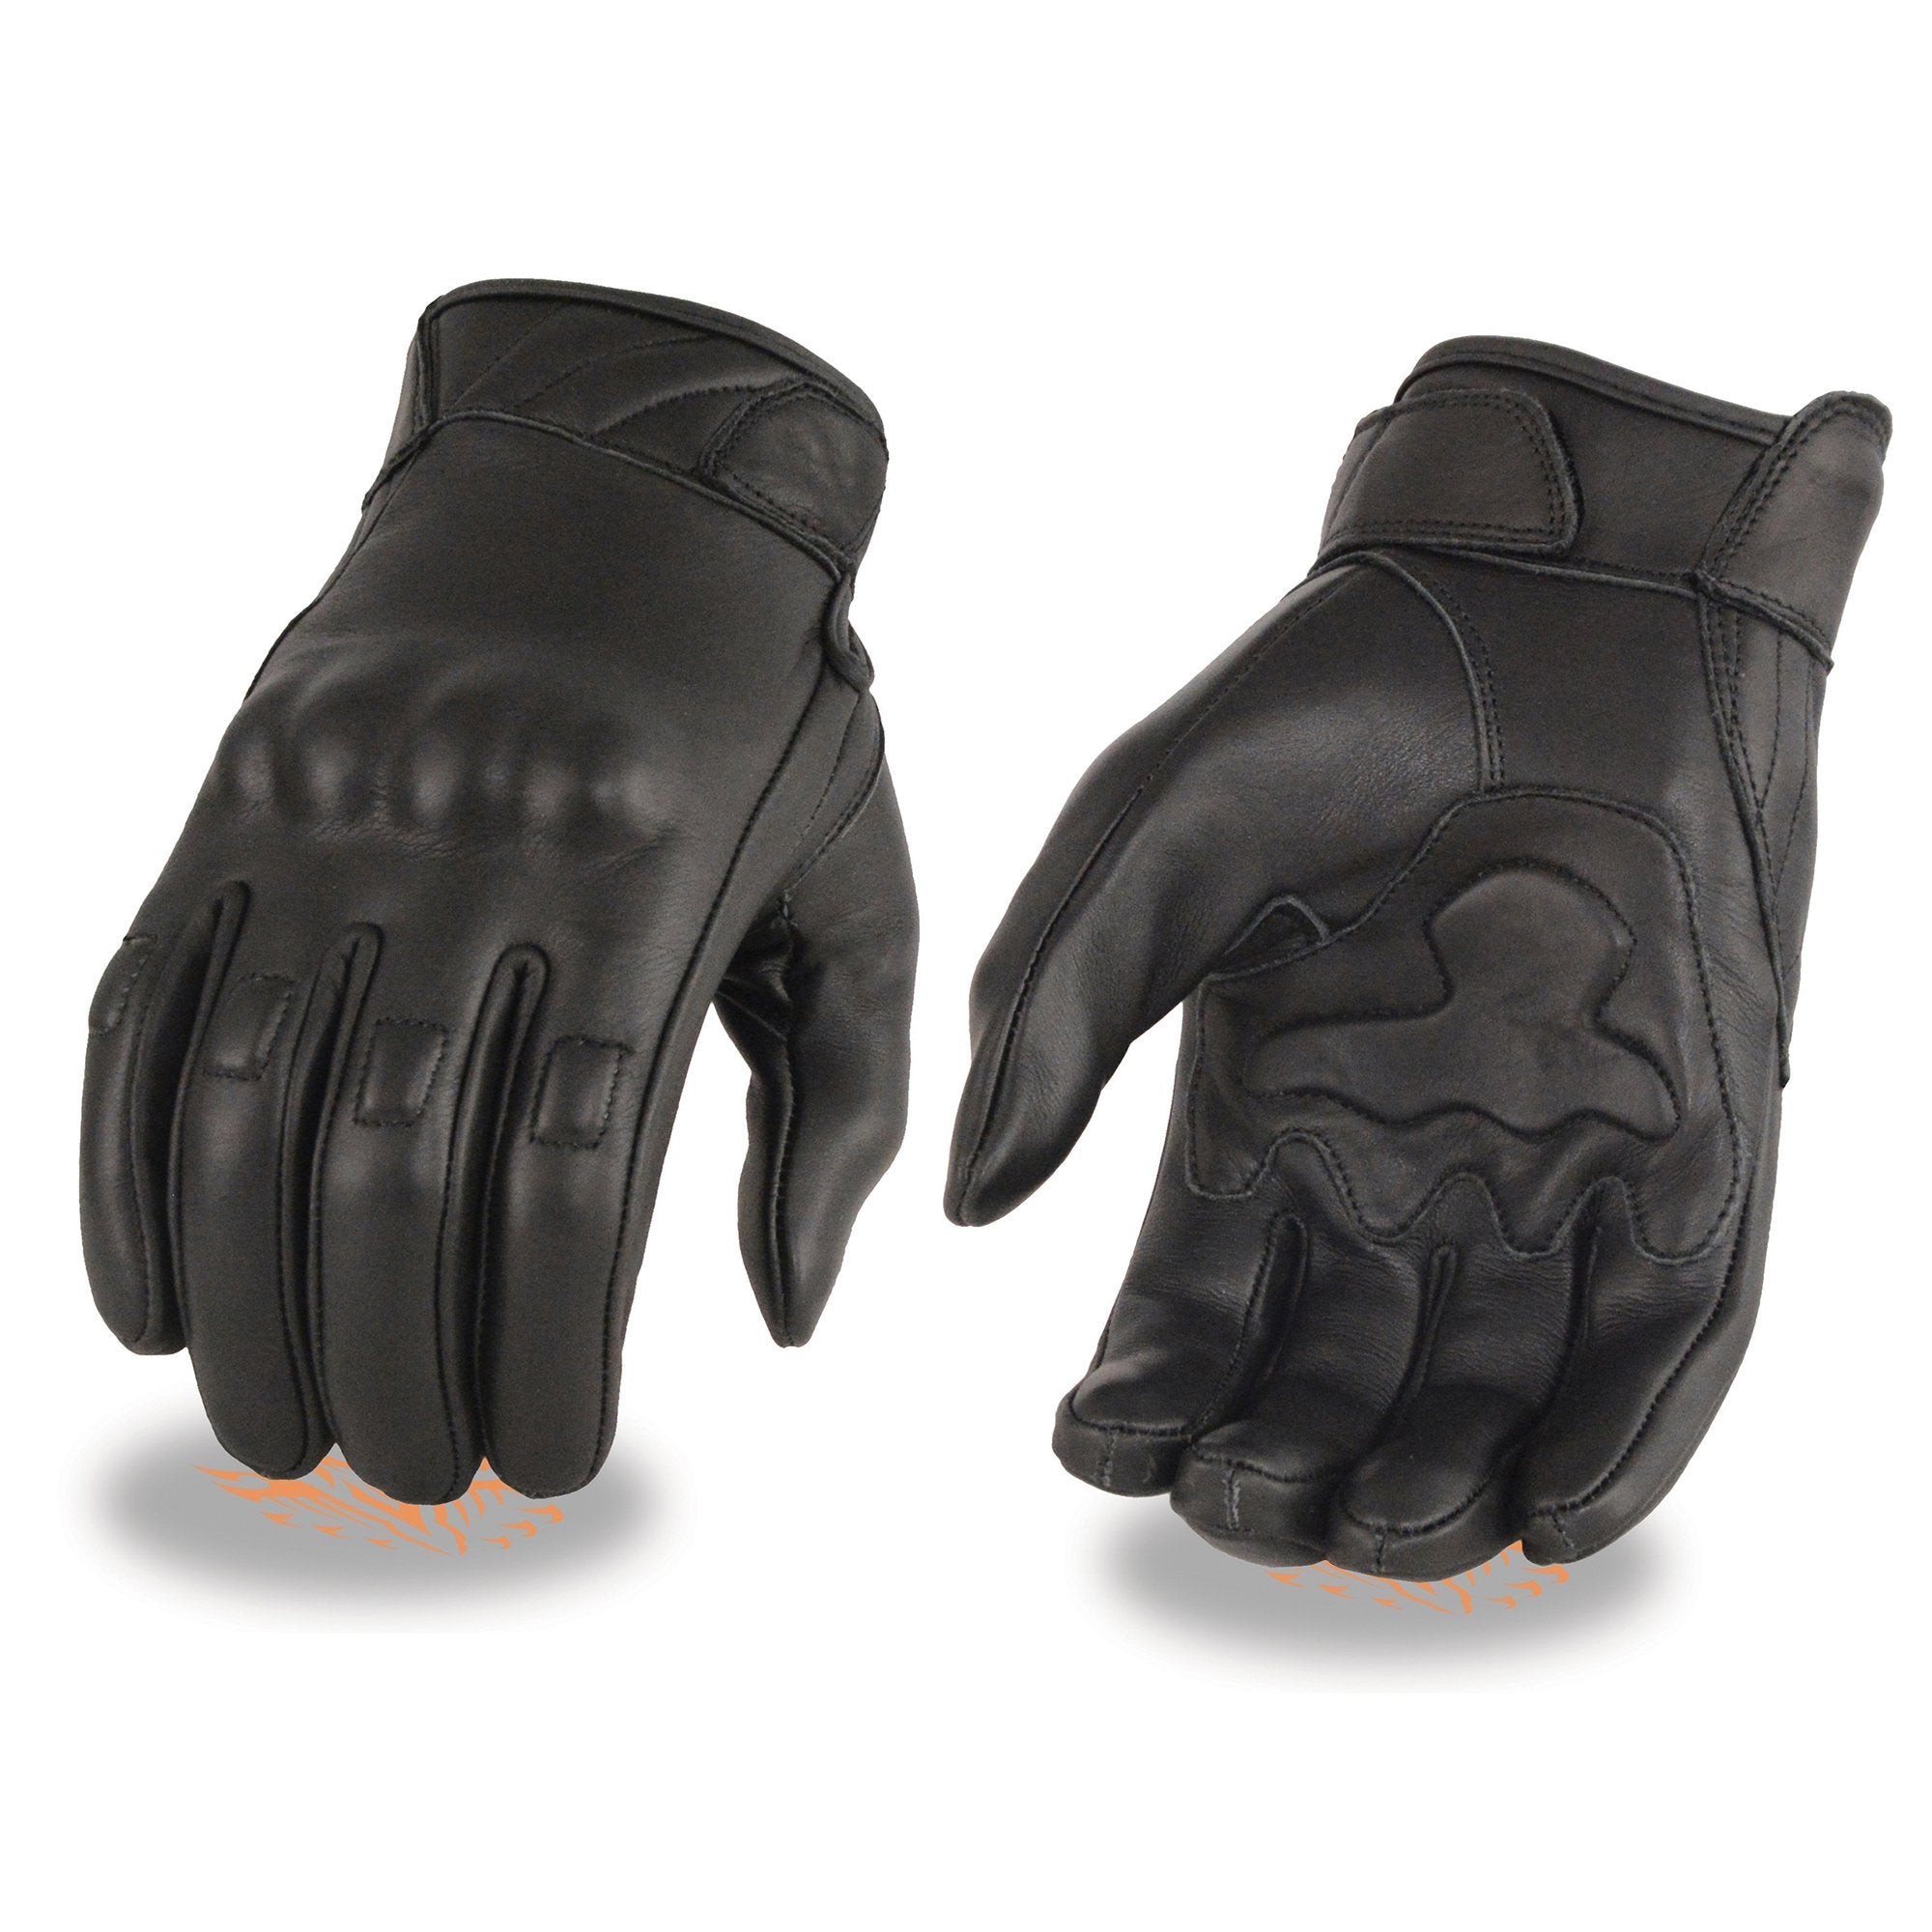 Milwaukee Leather MG7521 Men's Black Leather Gel Padded Palm Motorcycle Hand Gloves W/ Rubberized Protective Knuckle